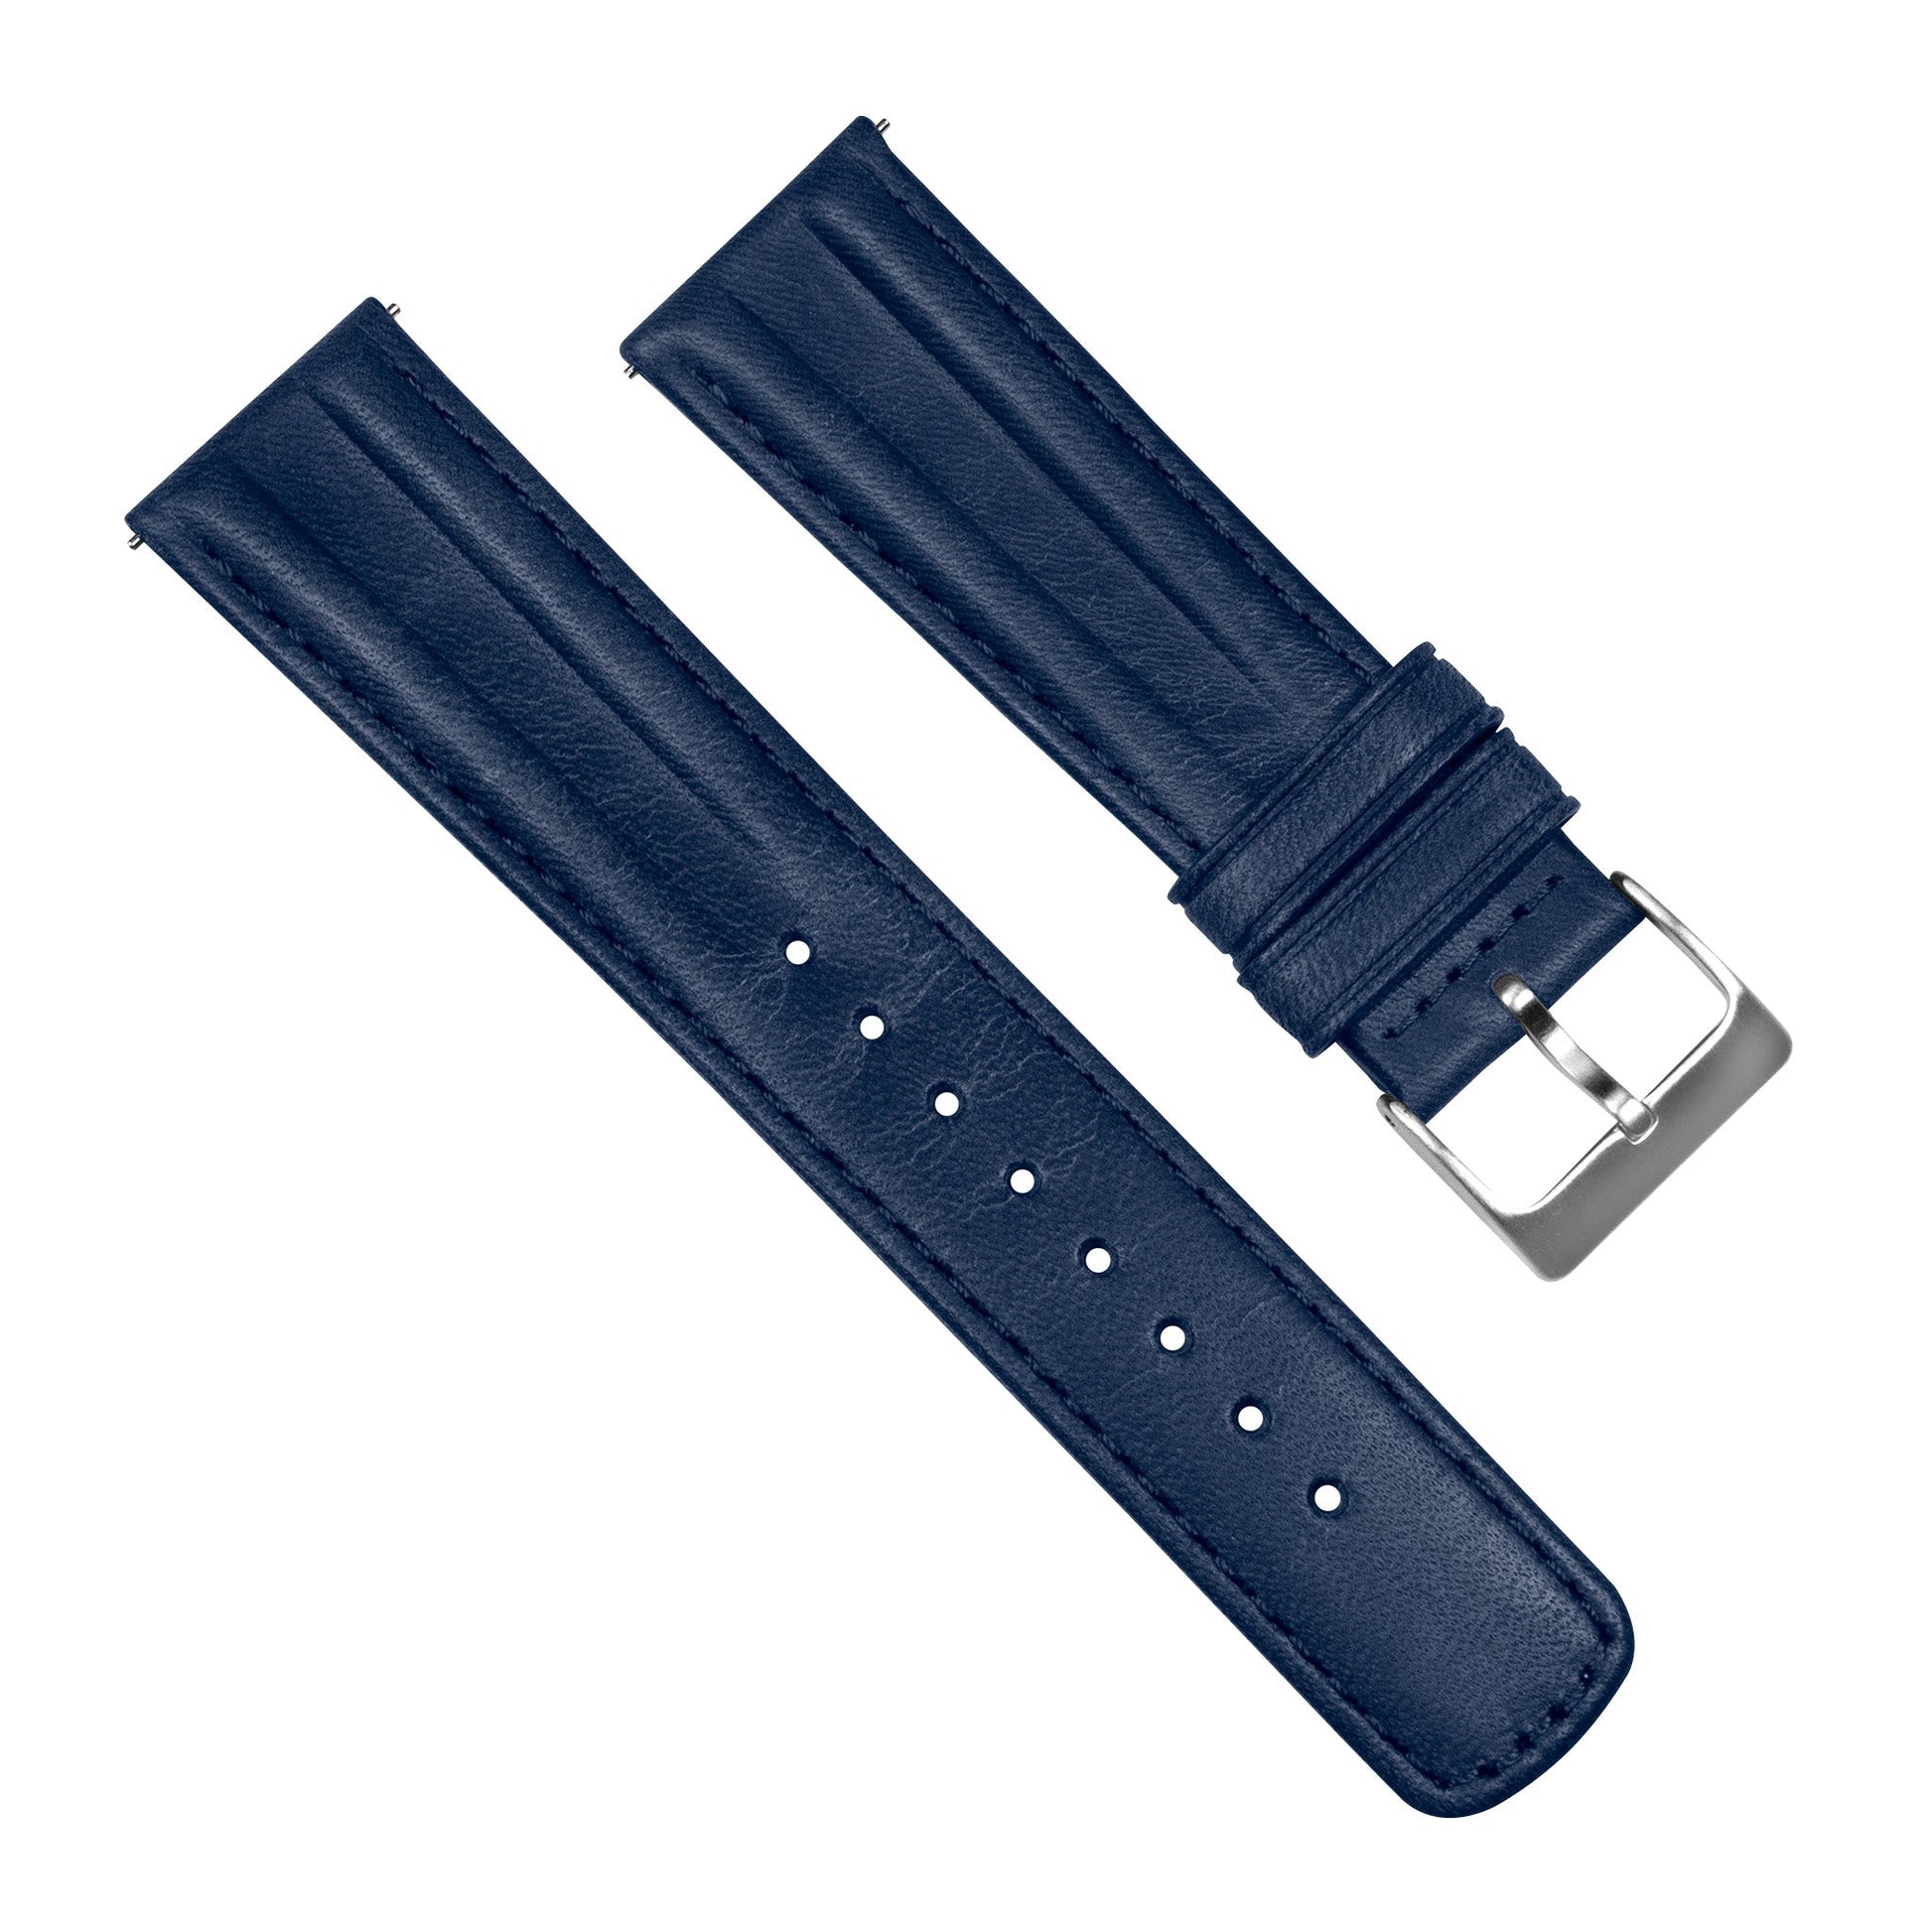 Samsung Galaxy Watch Active | Classic Horween Leather | Navy Blue - Barton Watch Bands